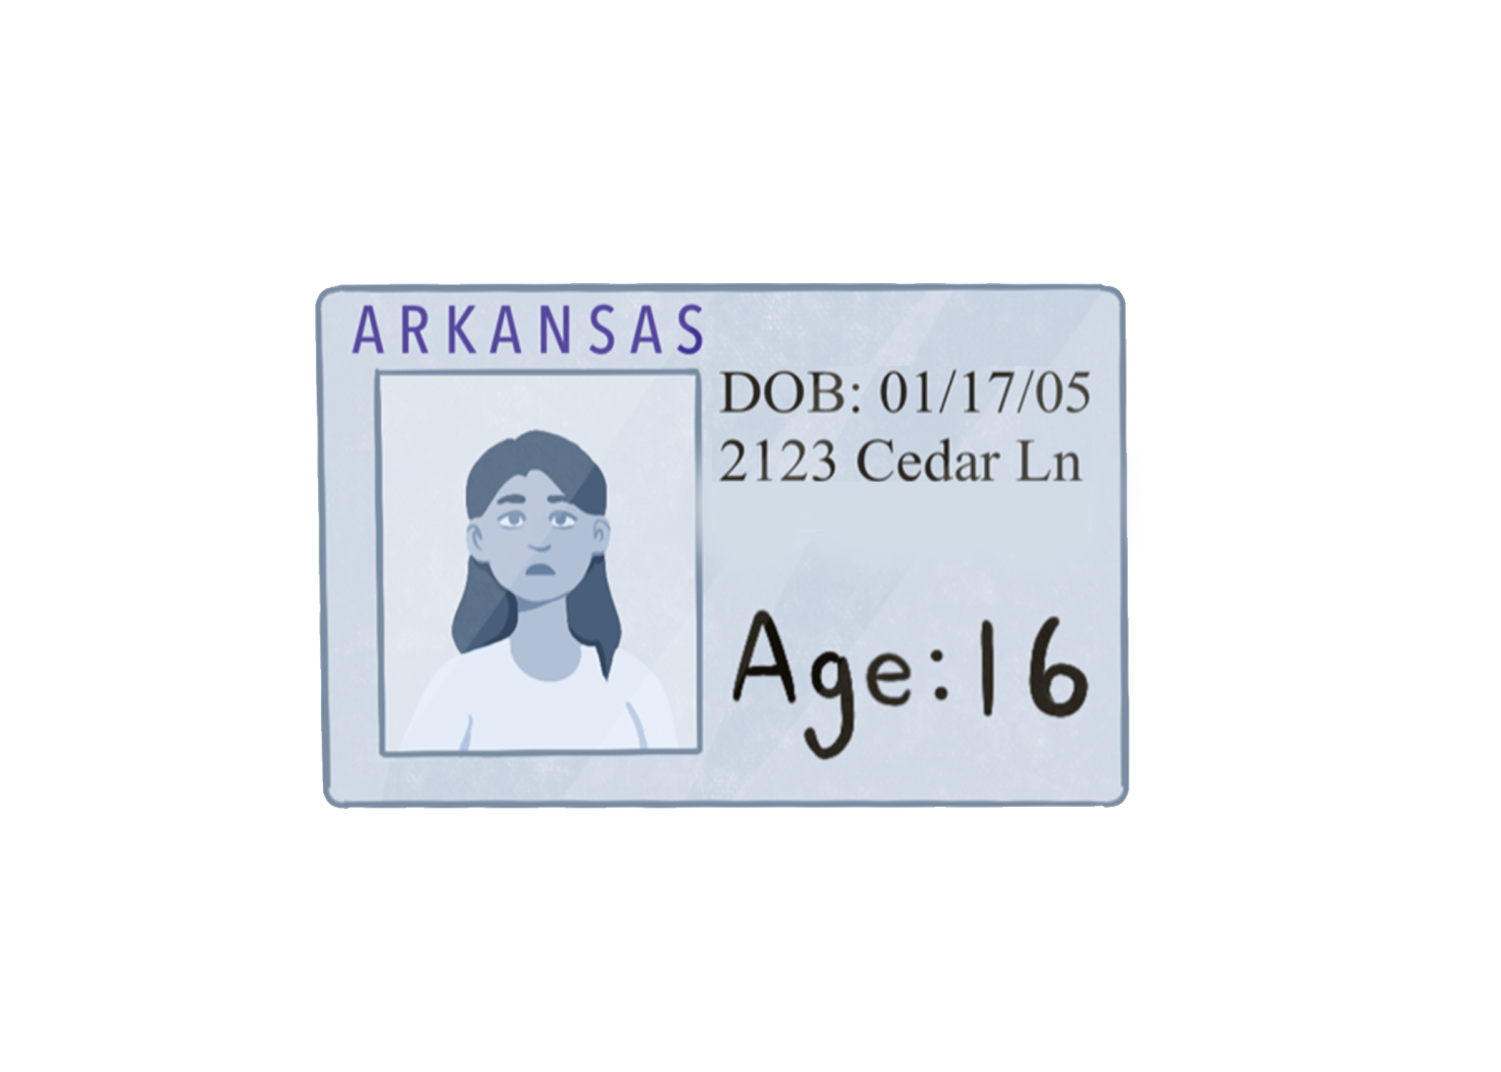 how to spot a fake arkansas id